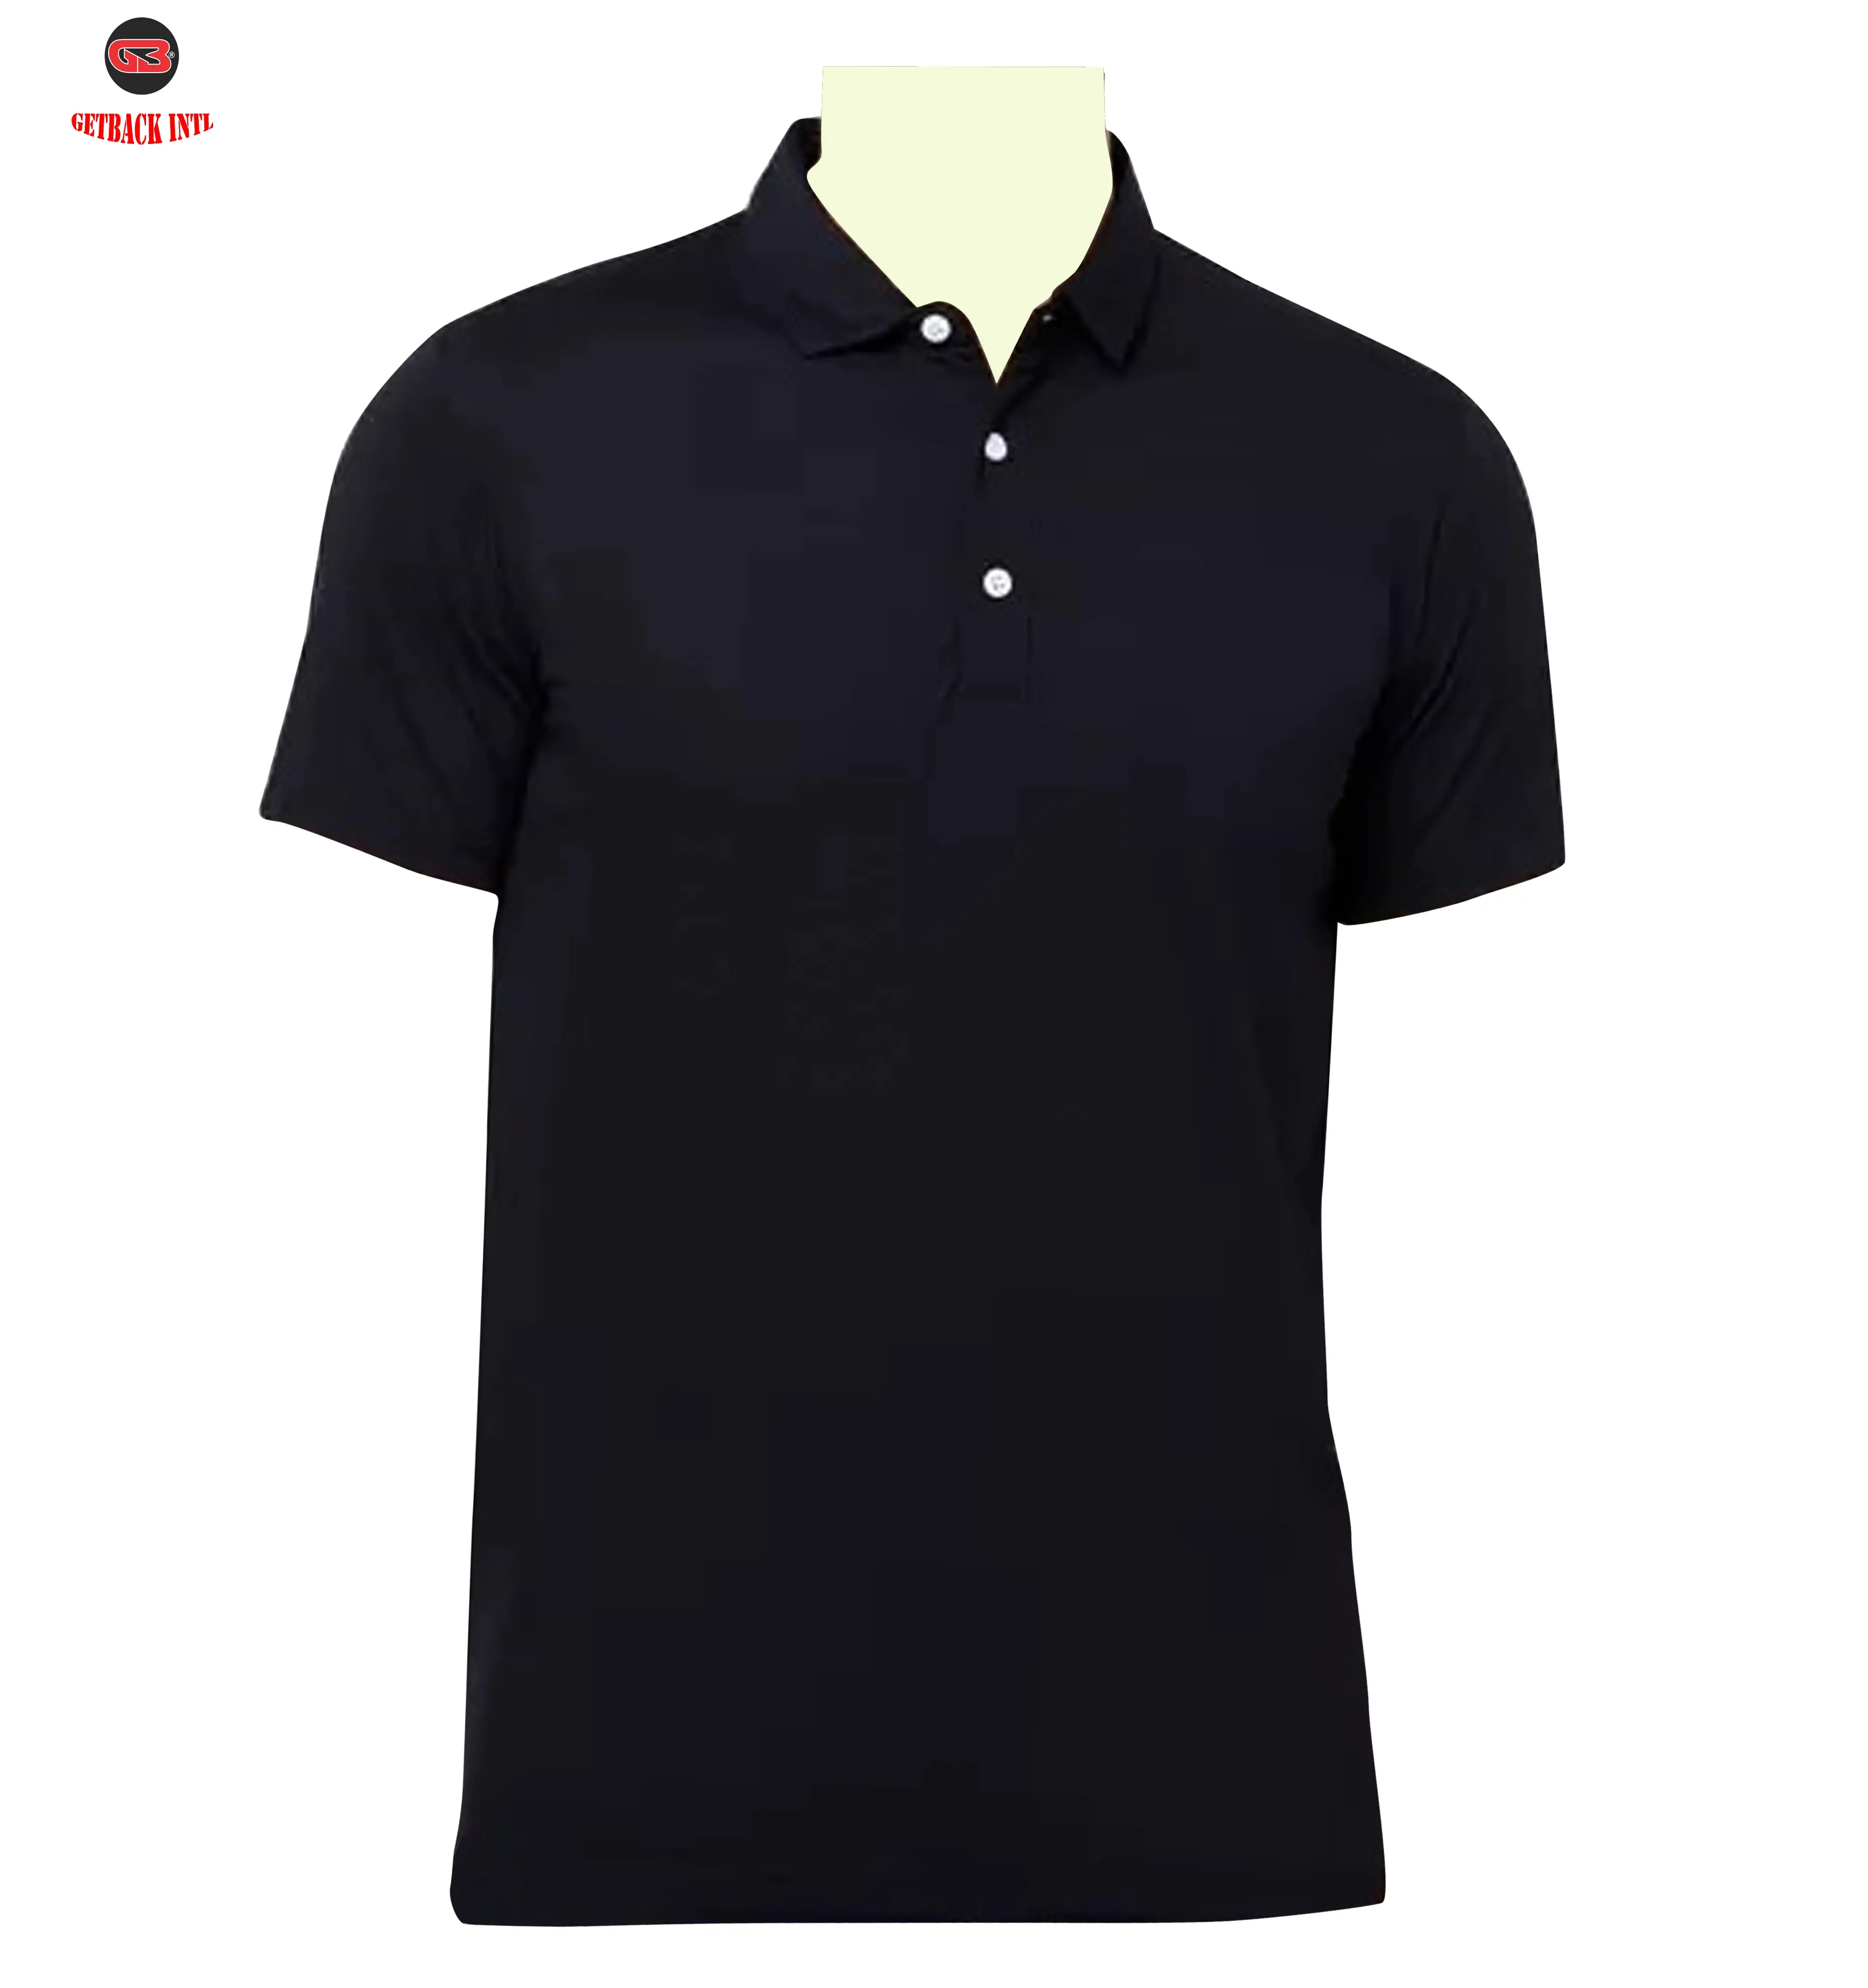 100% Cotton Pique Fabrics Polo Shirts with Collar Anti-Shrink Plus Size for Men Available in Multi Styles and Colors